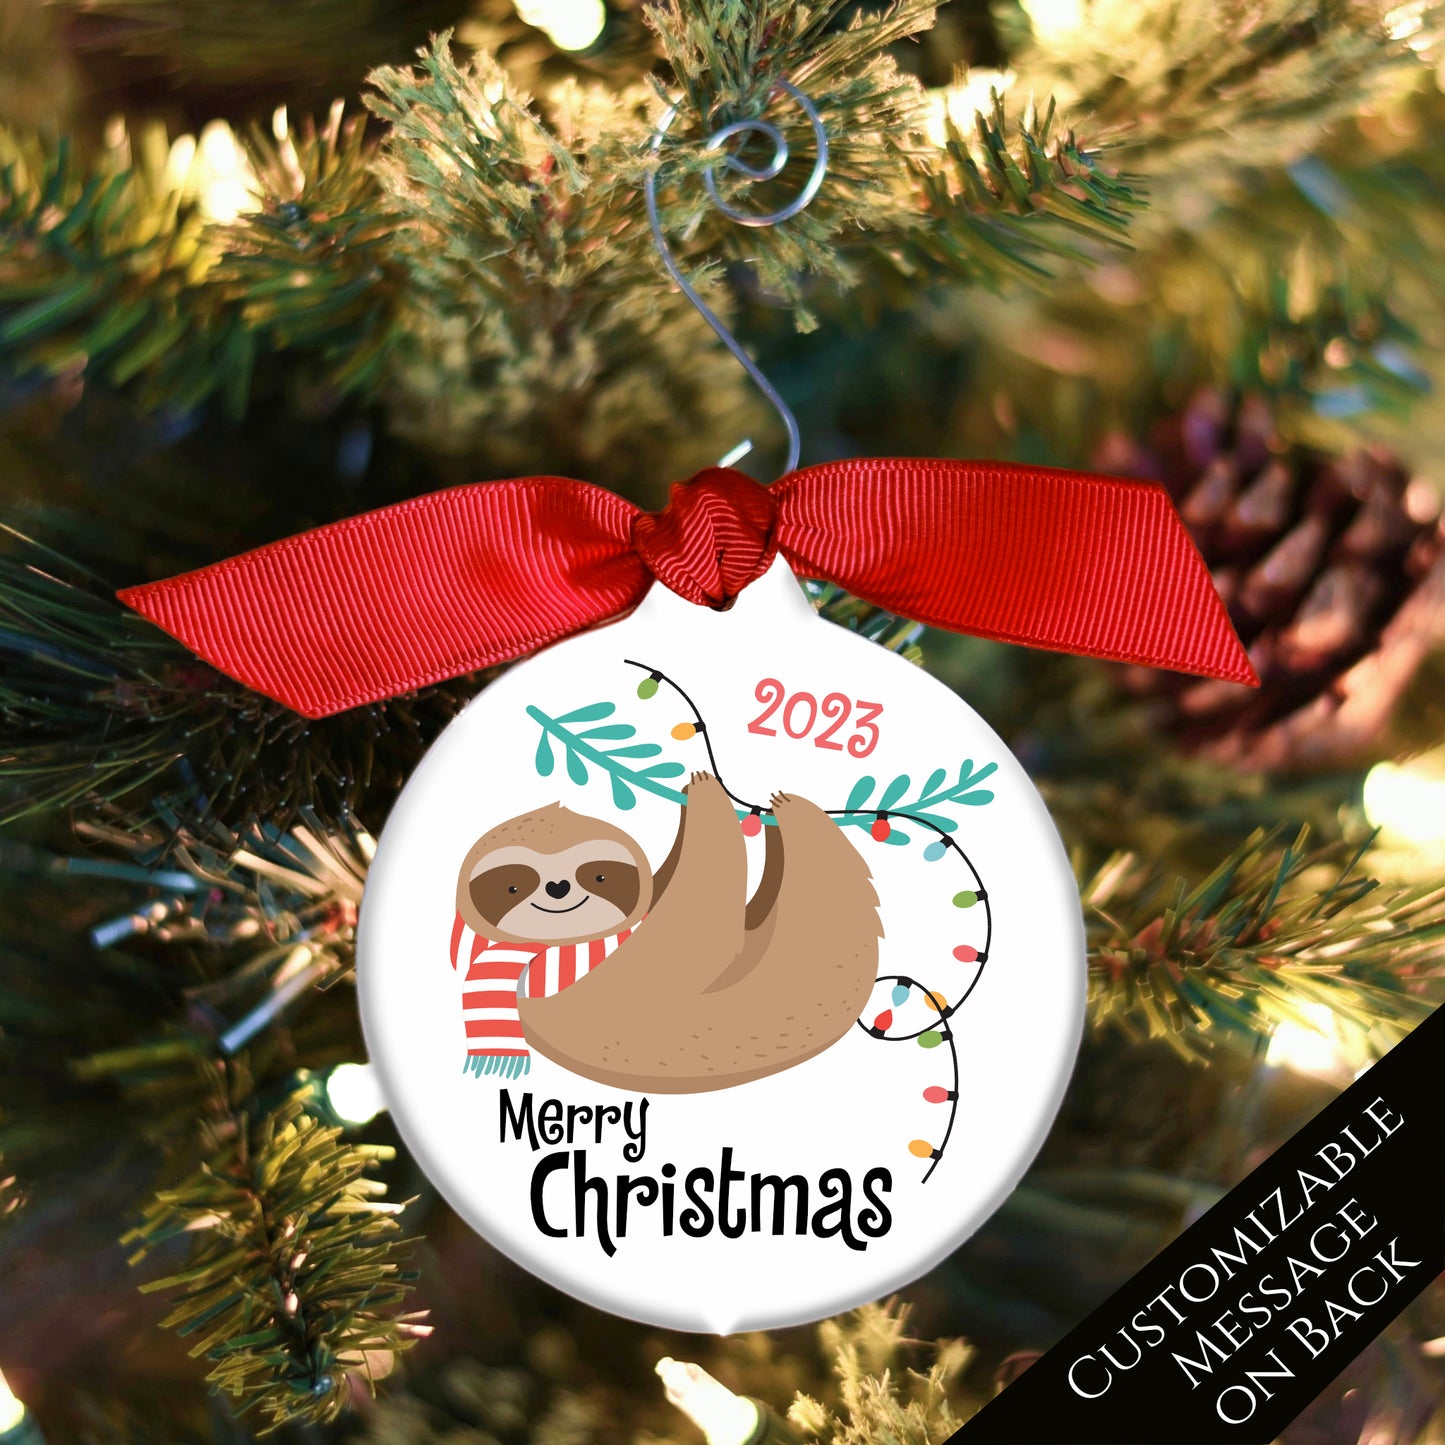 Sloth Décor - Christmas Ornament, Personalized, Sloth Gifts, Costa Rica